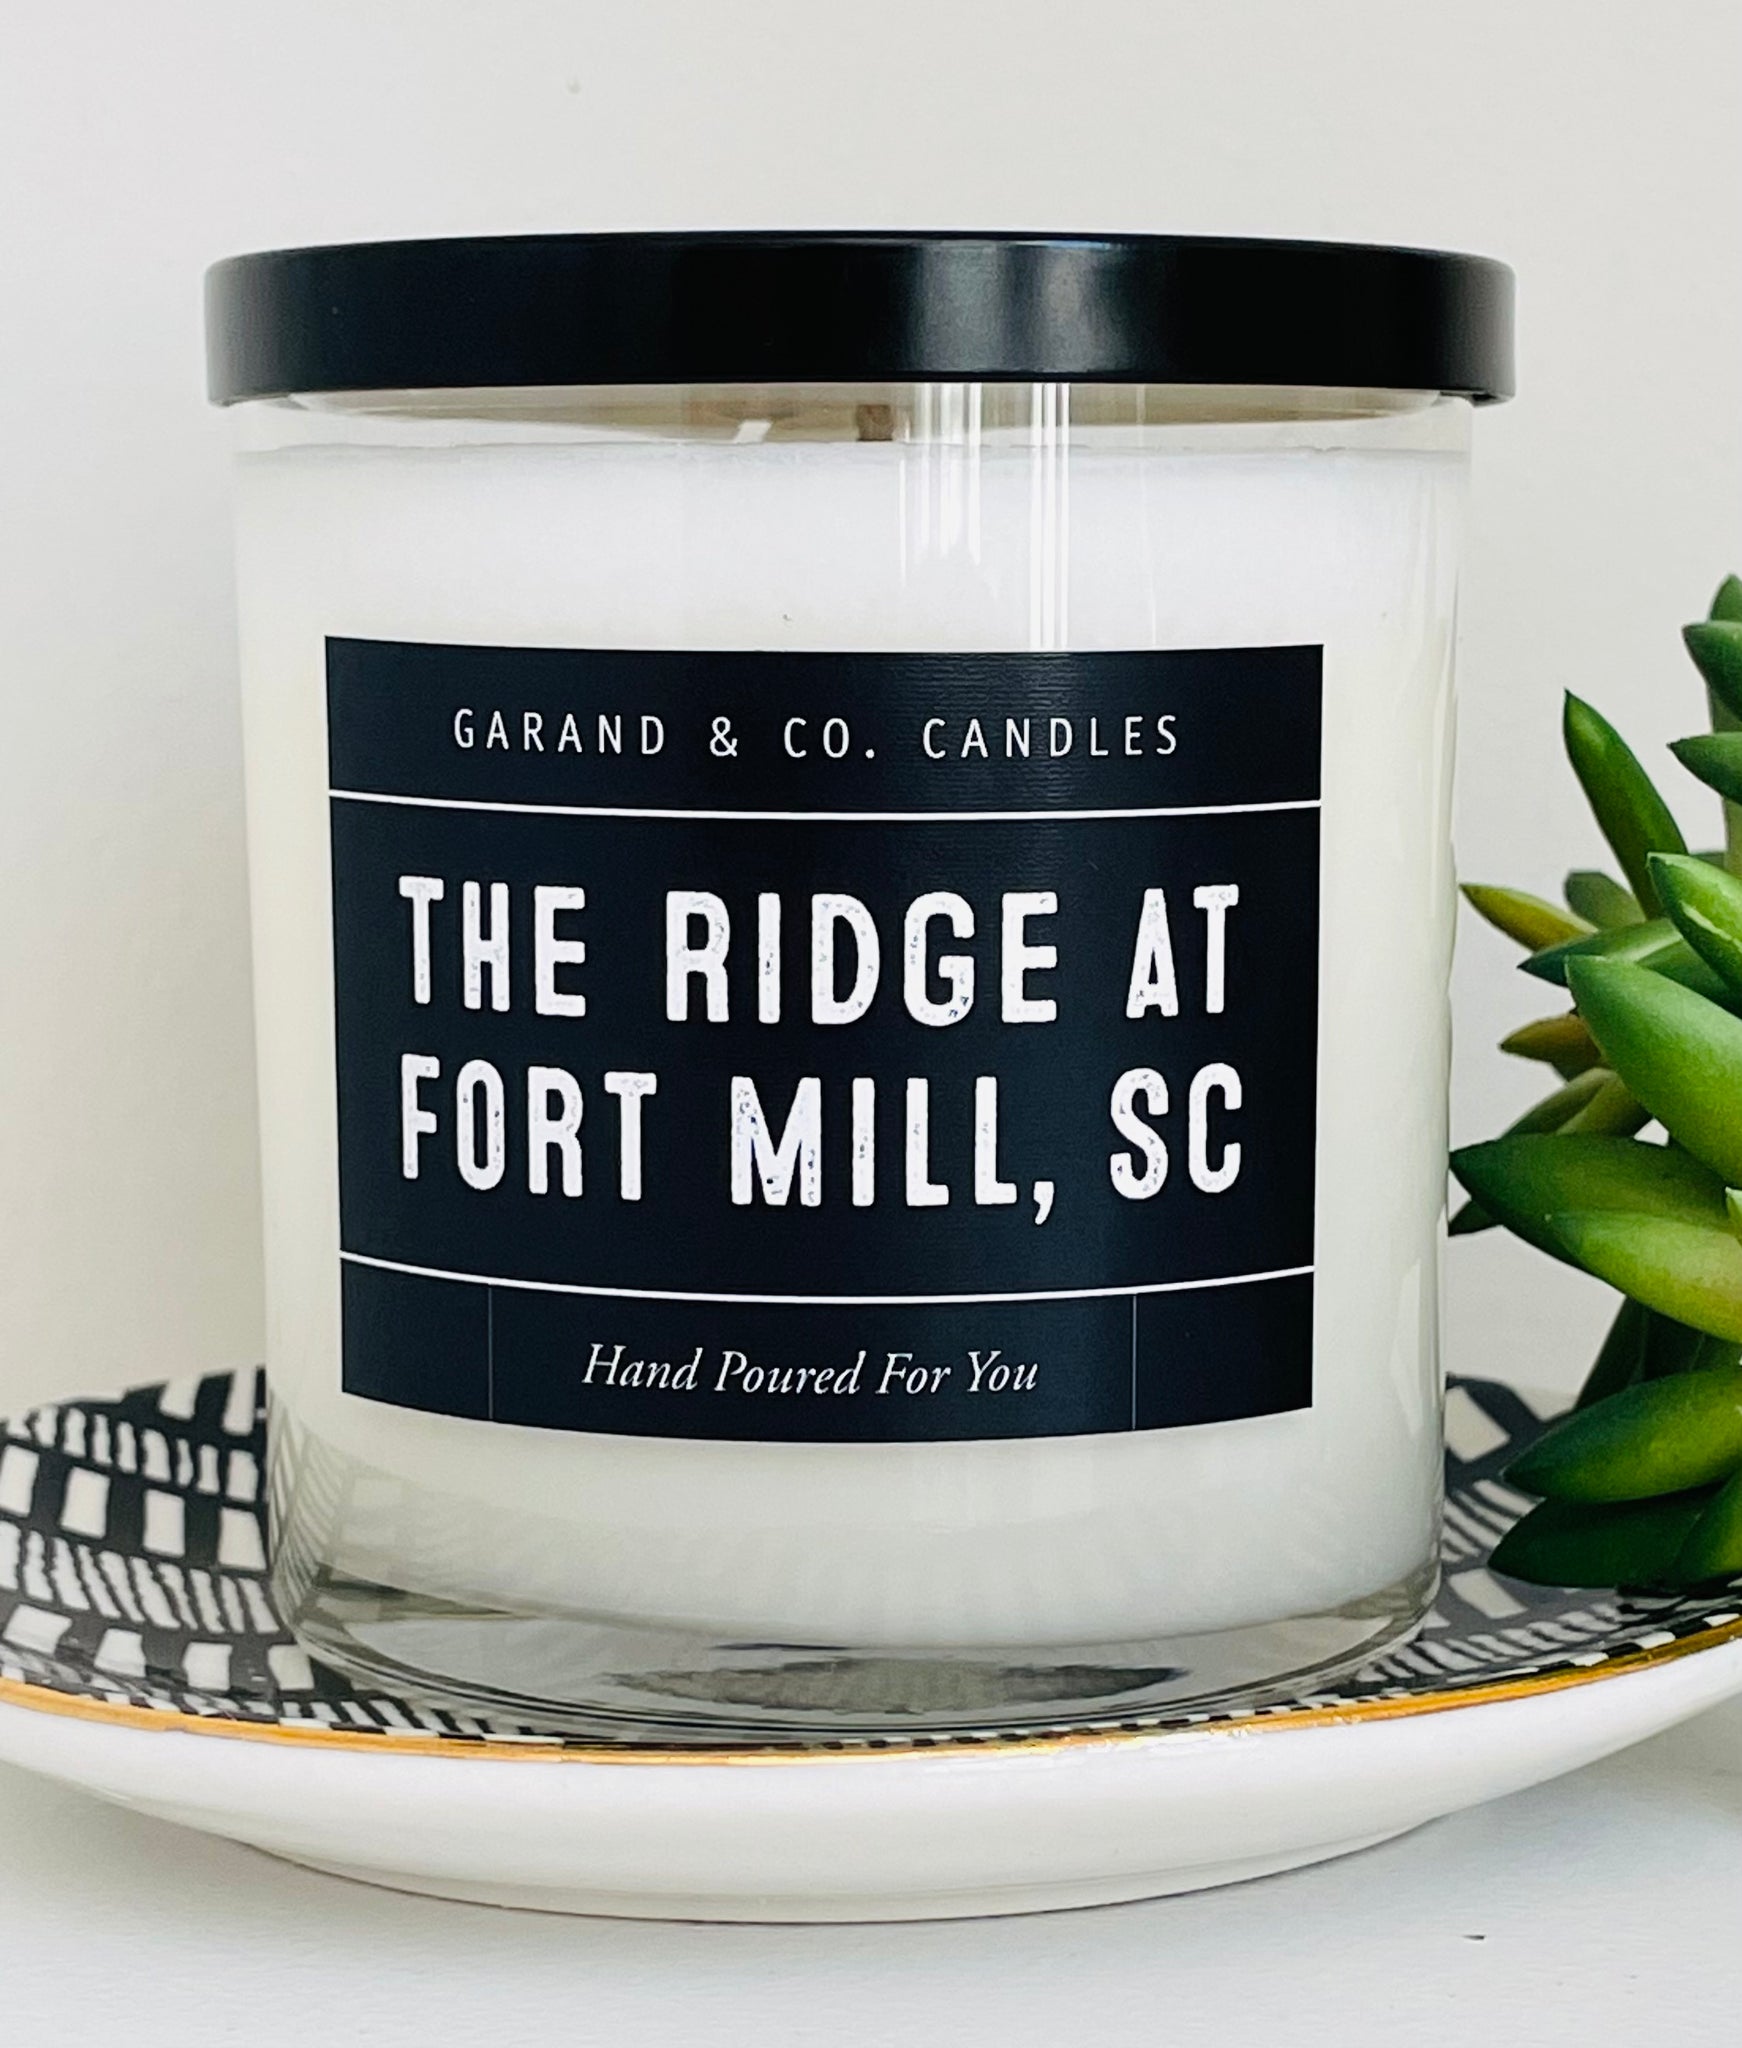 12 oz Clear Glass Jar Candle - The Ridge Fort Mill, SC